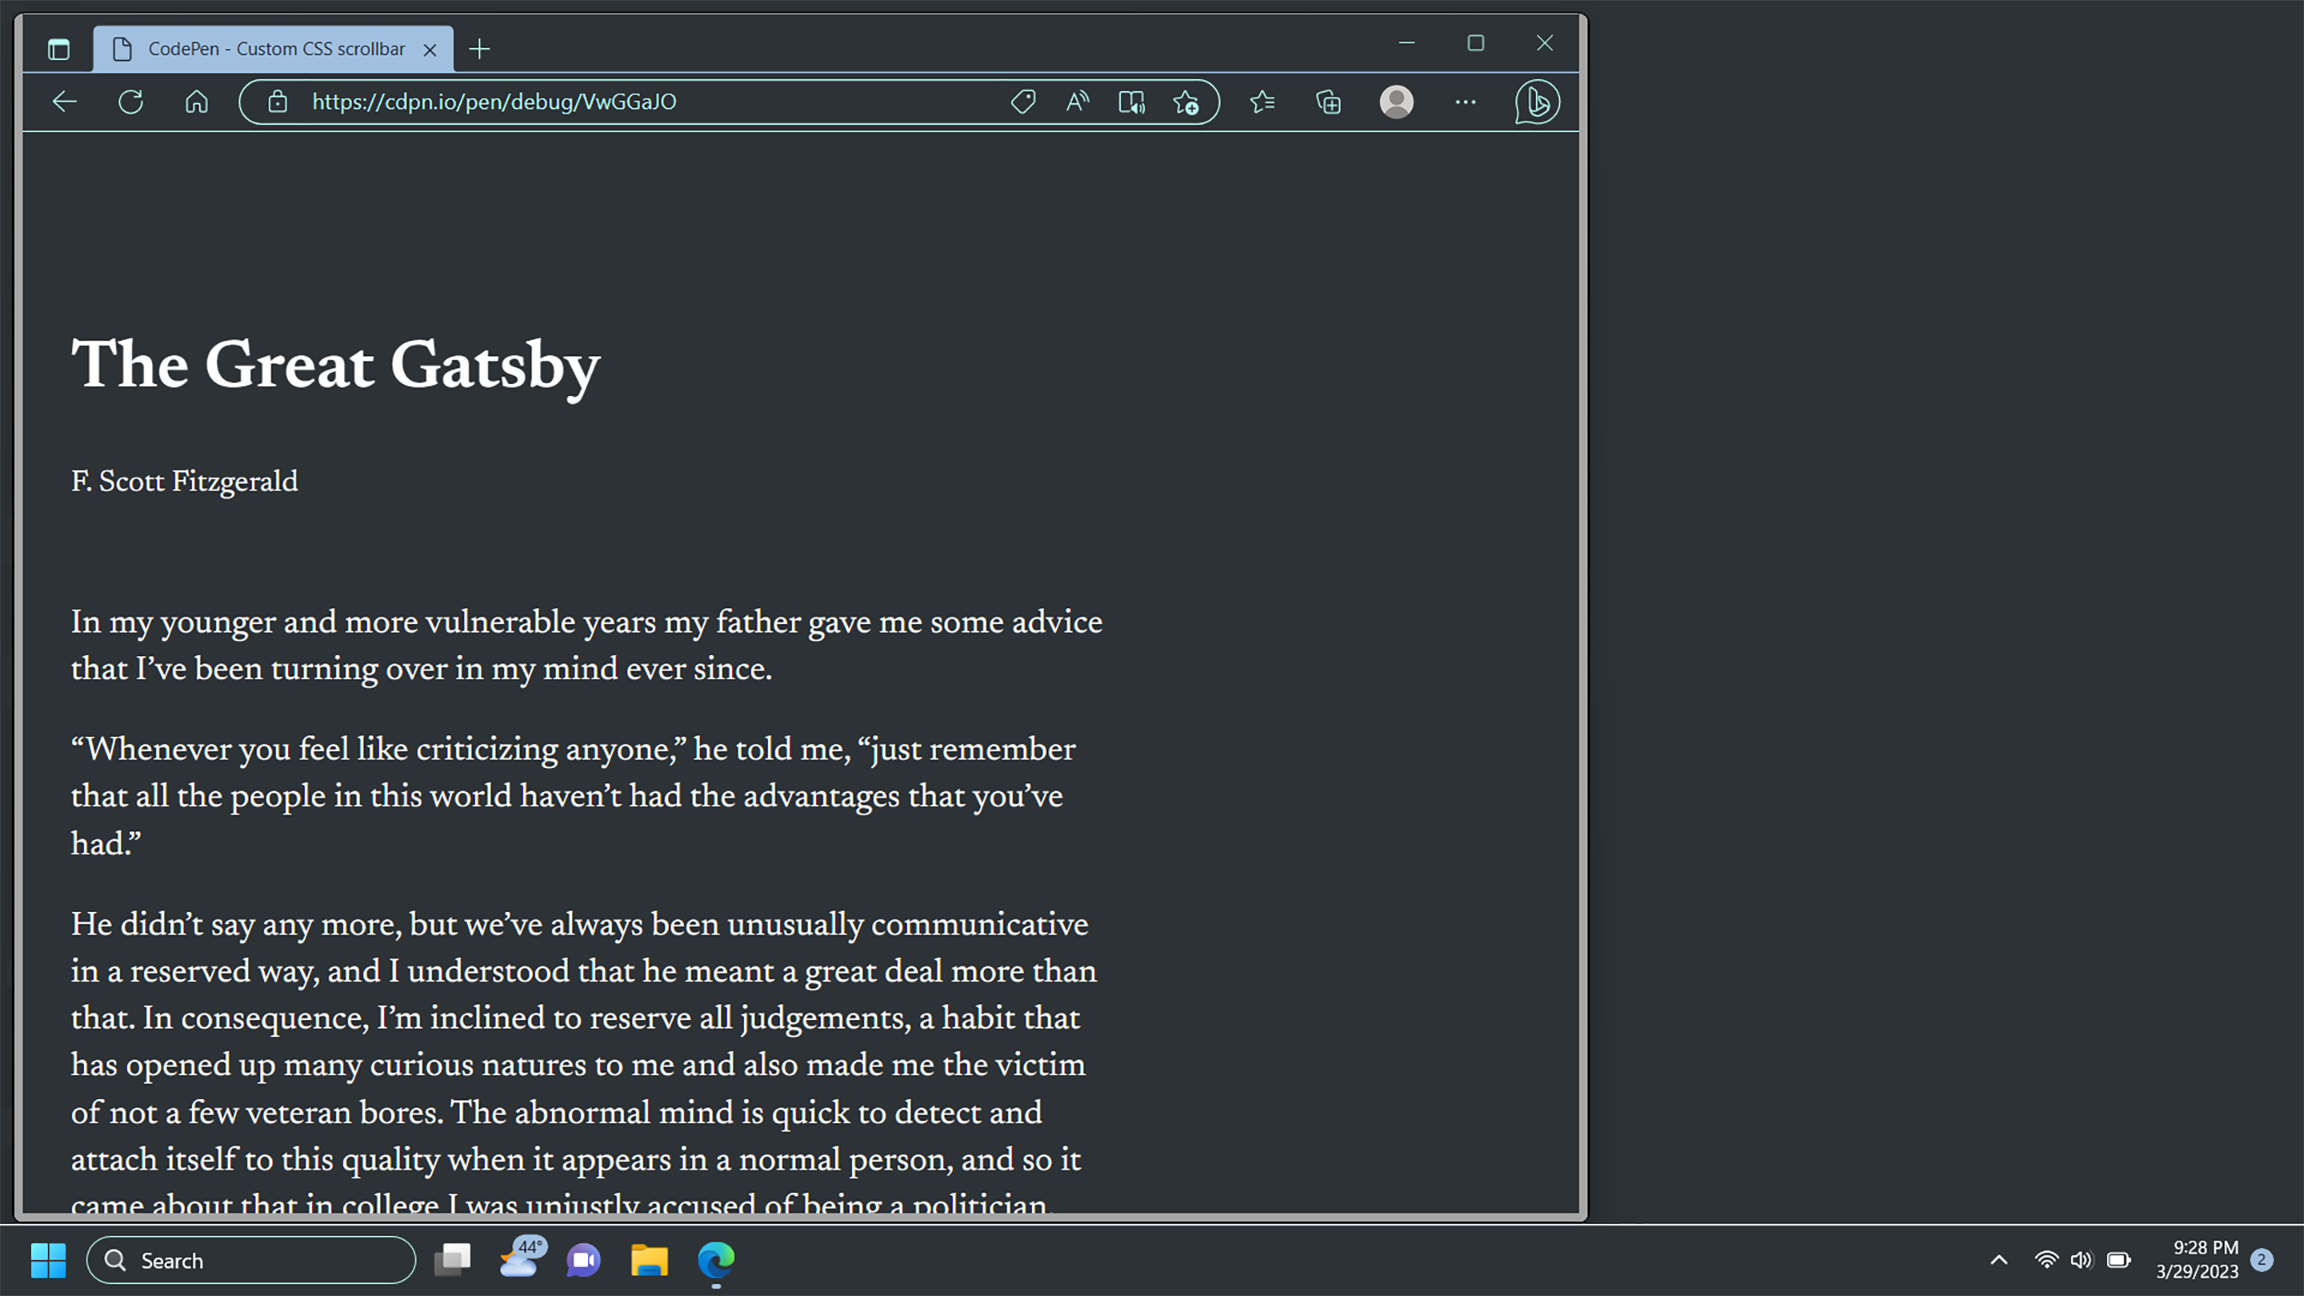 Microsoft Edge with a tab open to a CodePen set the display opening text to The Great Gatsby. The browser window is not maximized, to show the surrounding Windows 11 desktop. The browser, its CodePen contents, and the Windows 11 background and surrounding UI chrome are all set to a dark gray color with a pale blue accent color. This creates a sedate, uniform visual effect. Screenshot.